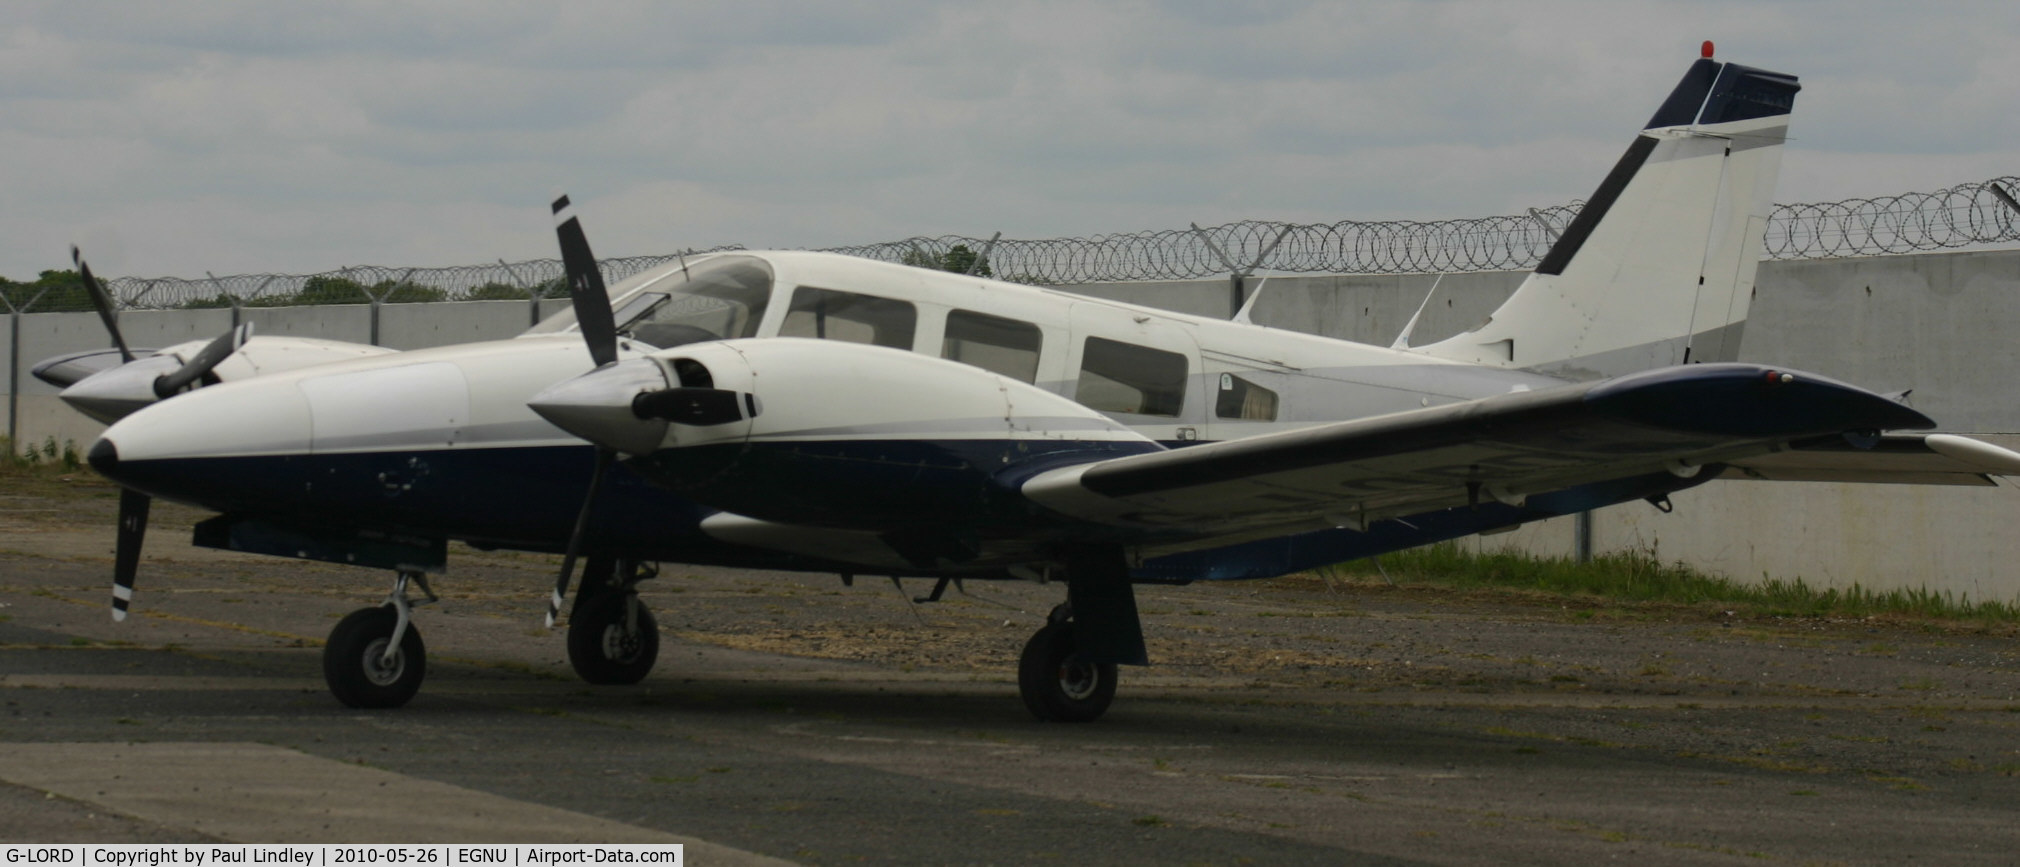 G-LORD, 1979 Piper PA-34-200T Seneca II C/N 34-7970347, awaiting attention